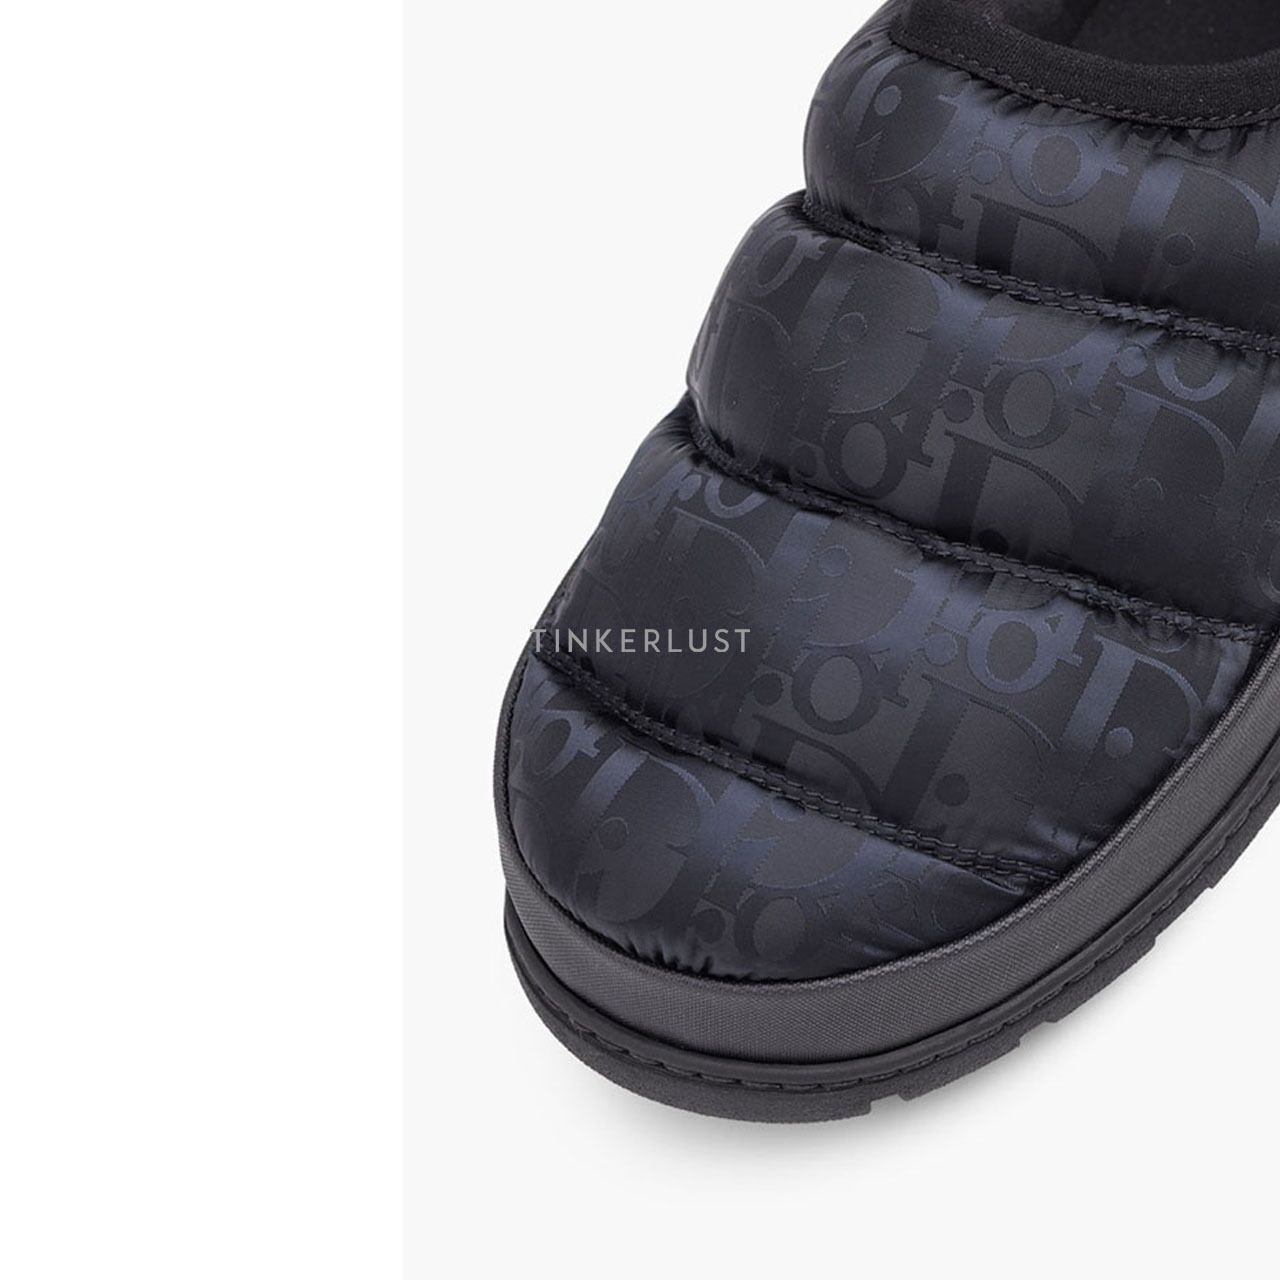 Christian Dior Oblique Snow Padded Slipper in Black Quilted Technical Fabric Sneakers